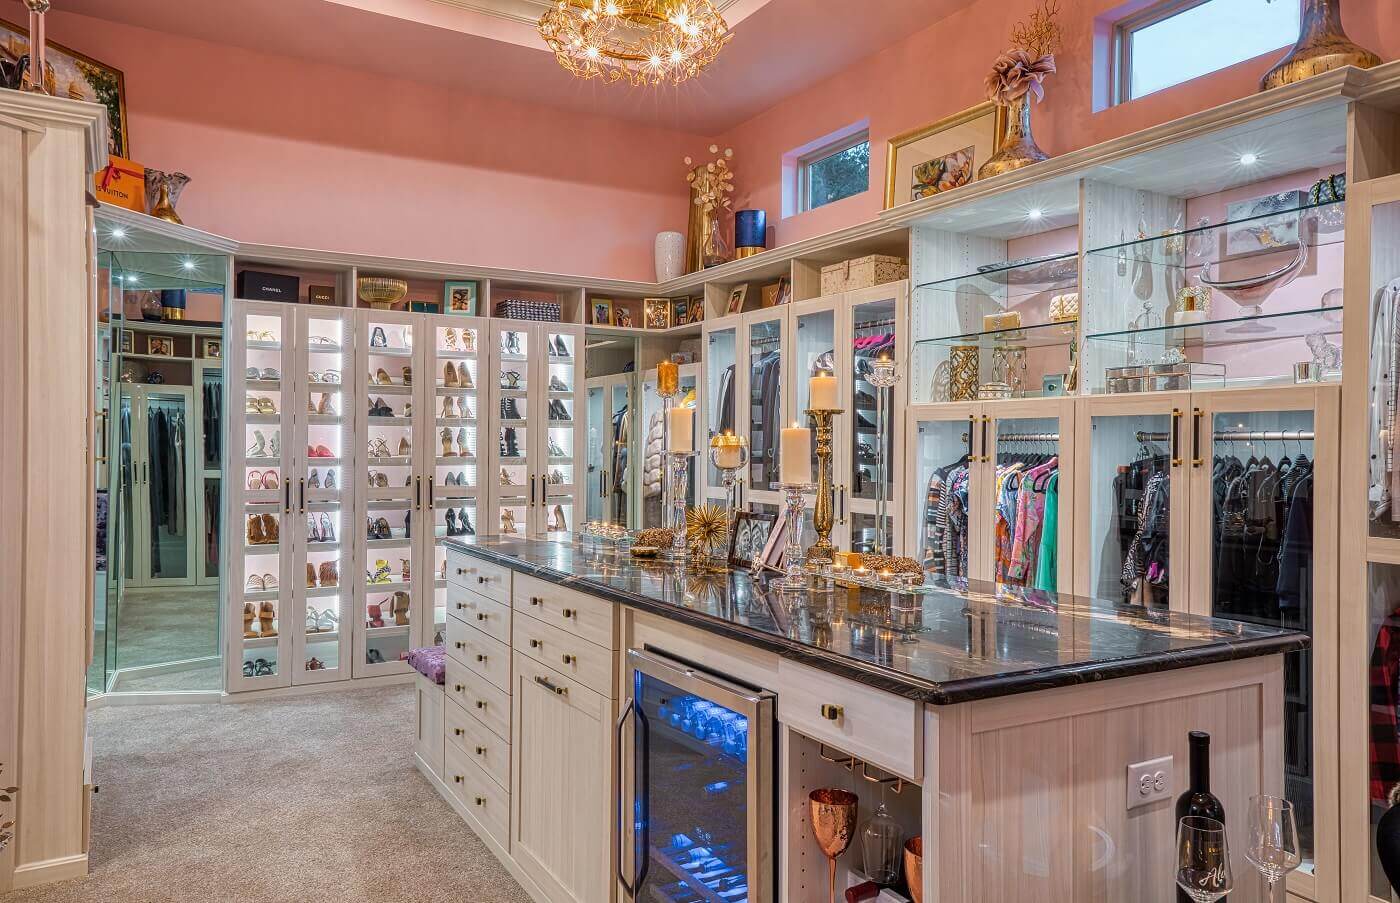 Luxurious Renovation of His & Her Closet